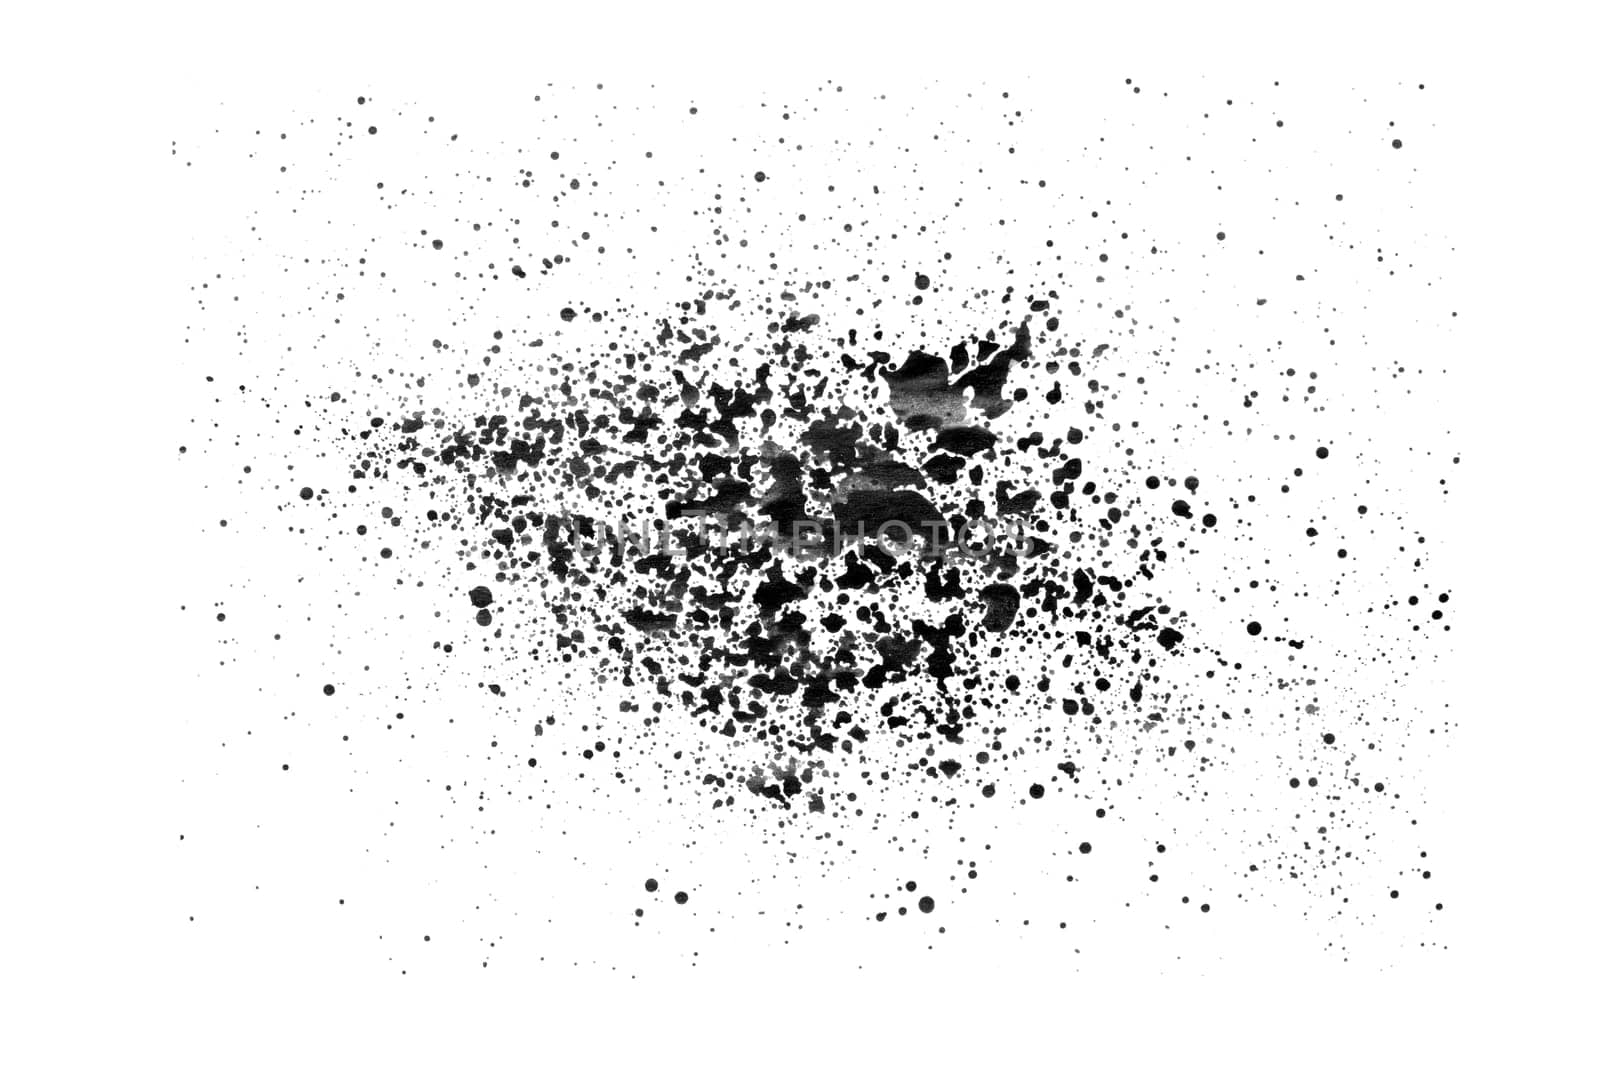 Splatter of black paint isolated on a white background. Stock photo by anna_artist